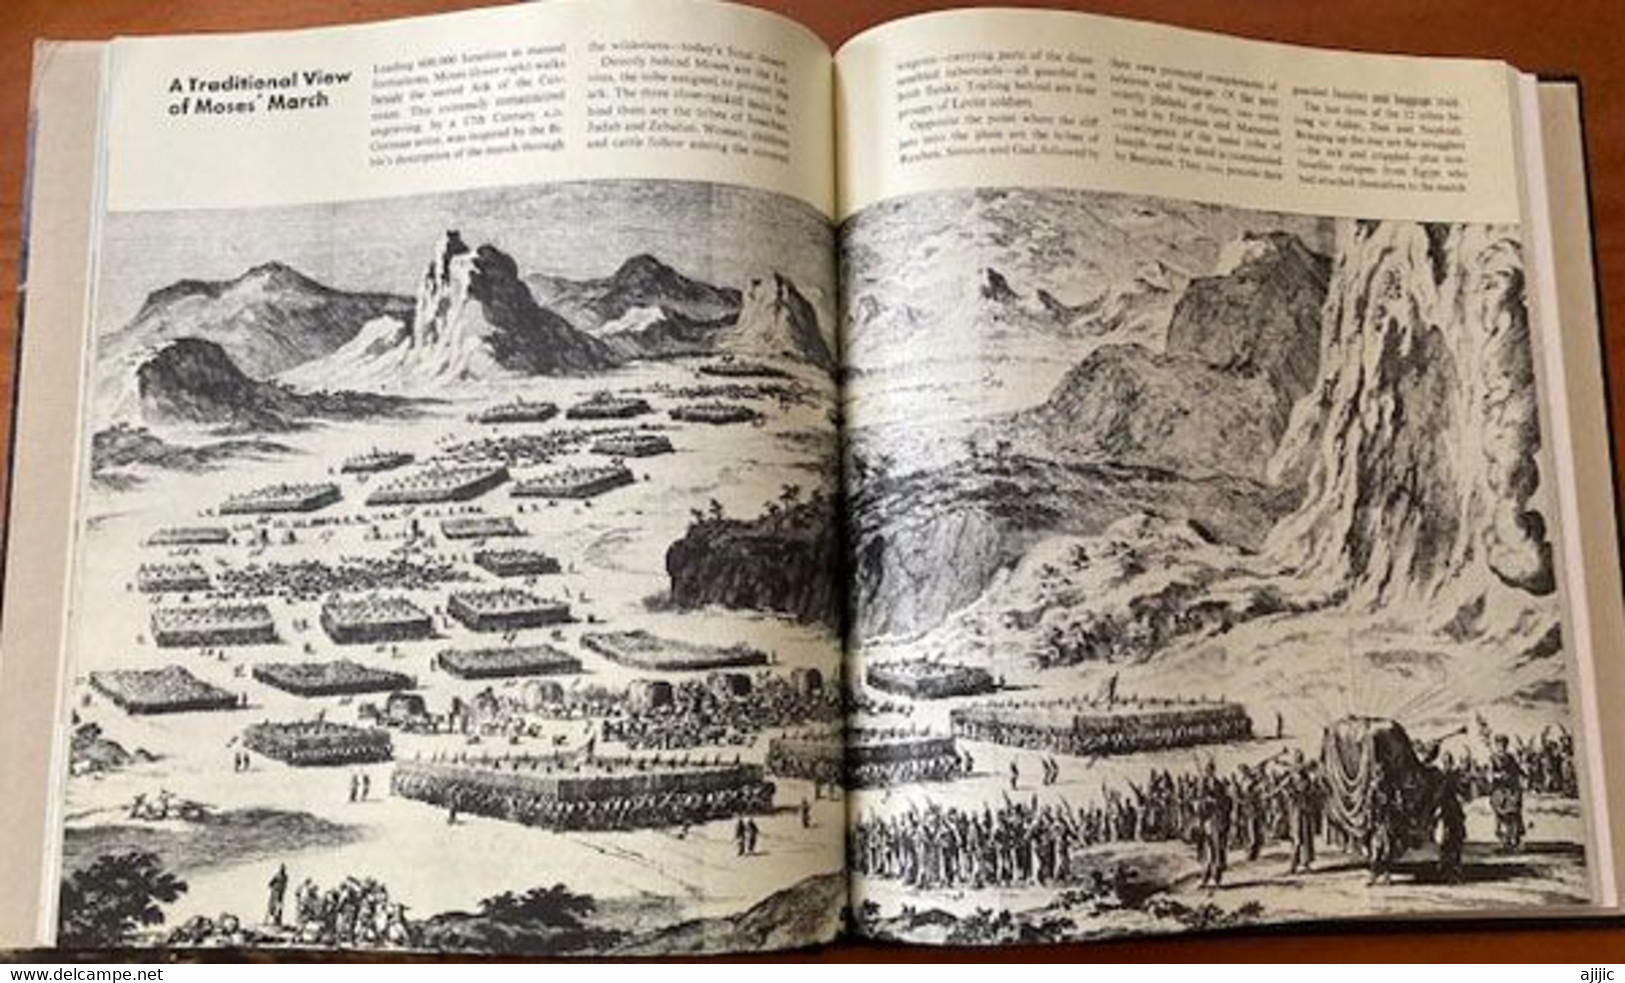 THE ISRAELITES.Hard Cover.Time Life Books. 160 Pages. Good Condition,many Photos. Weight 730 Gr. (in English) - Middle East